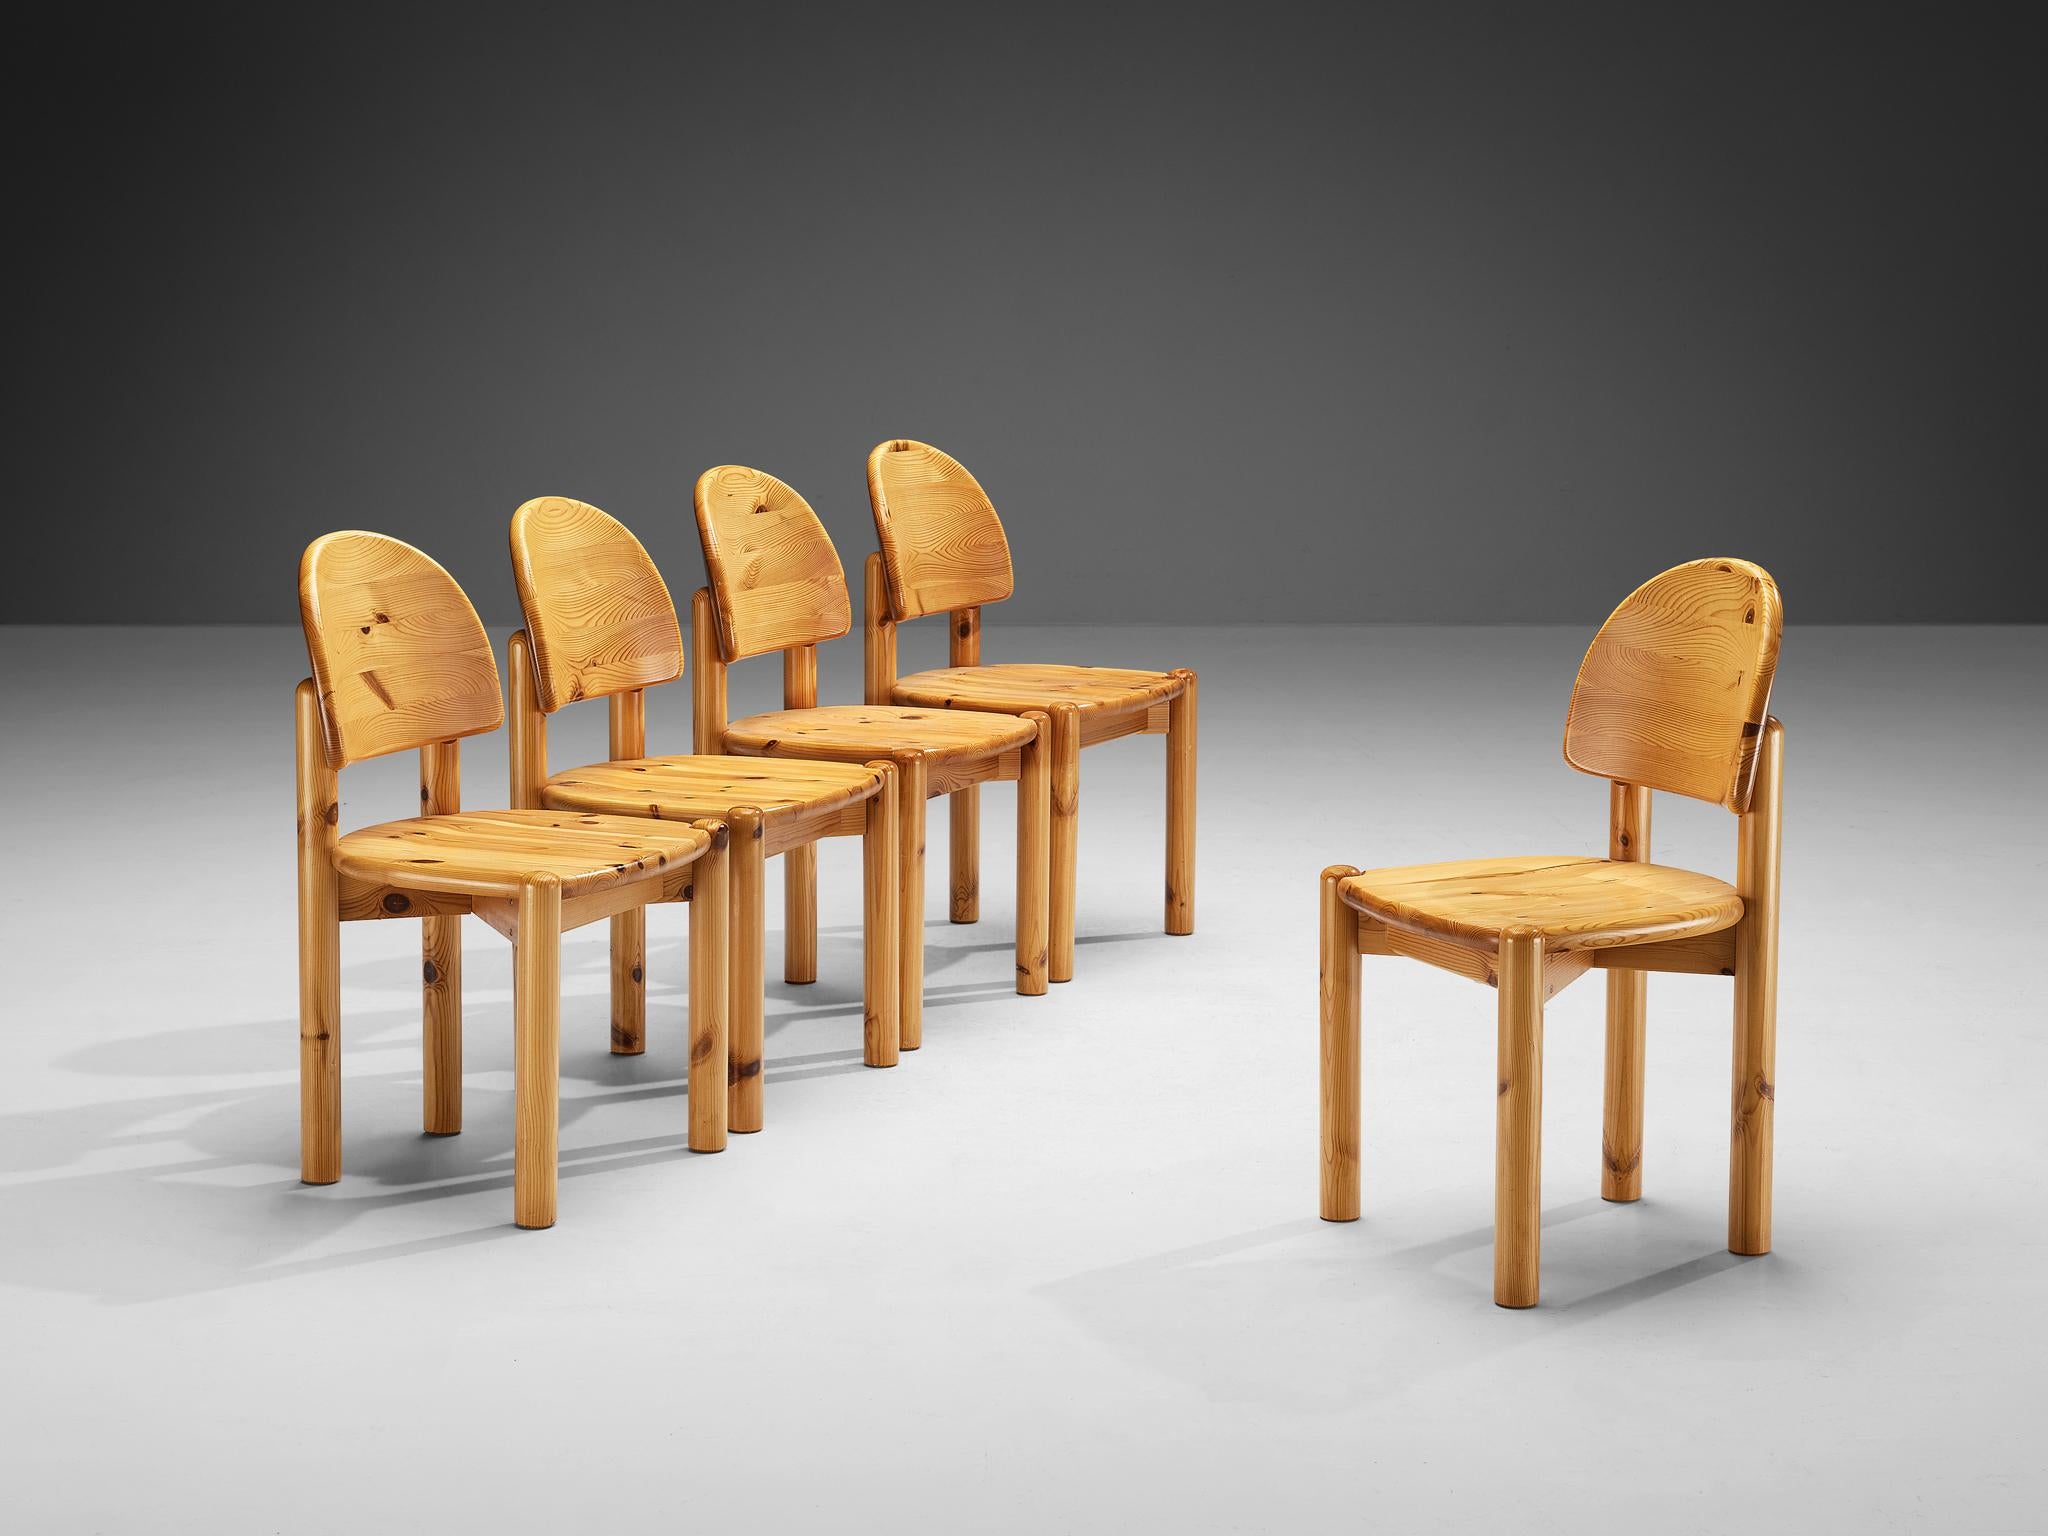 Rainer Daumiller for Hirtshals Sawmill, set of five dining chairs, pine, Denmark, 1970s

Beautiful, organic and natural dining chairs in solid pine by Danish Rainer Daumiller in the 1970s. A simplistic design with a round seating and attention for